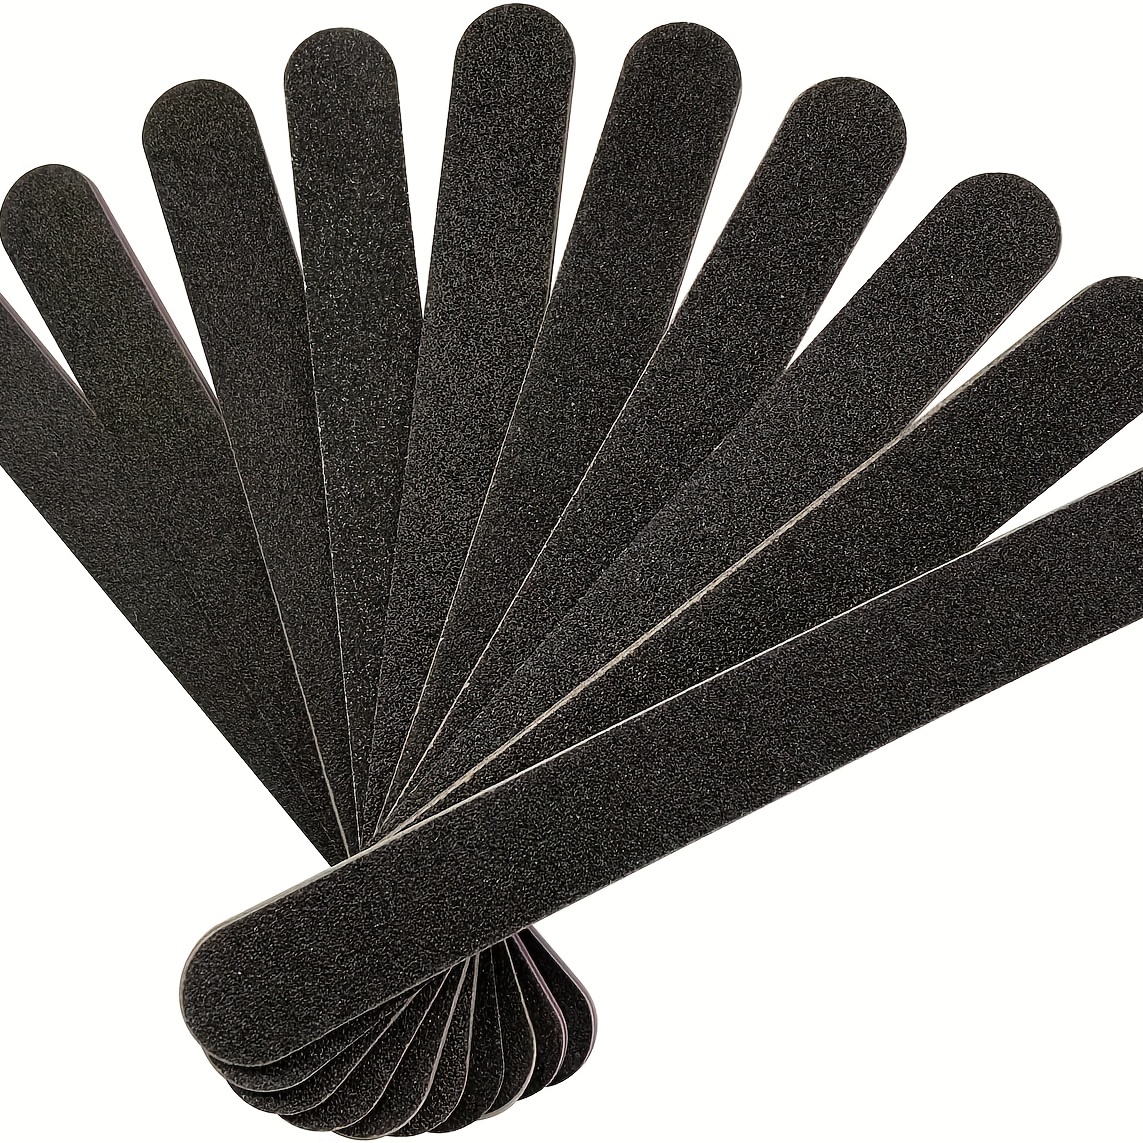 

5 Pcs Double Sided 100/180 Grit Nail Files Emery Board Black Manicure Pedicure Tool And Nail Buffering Files